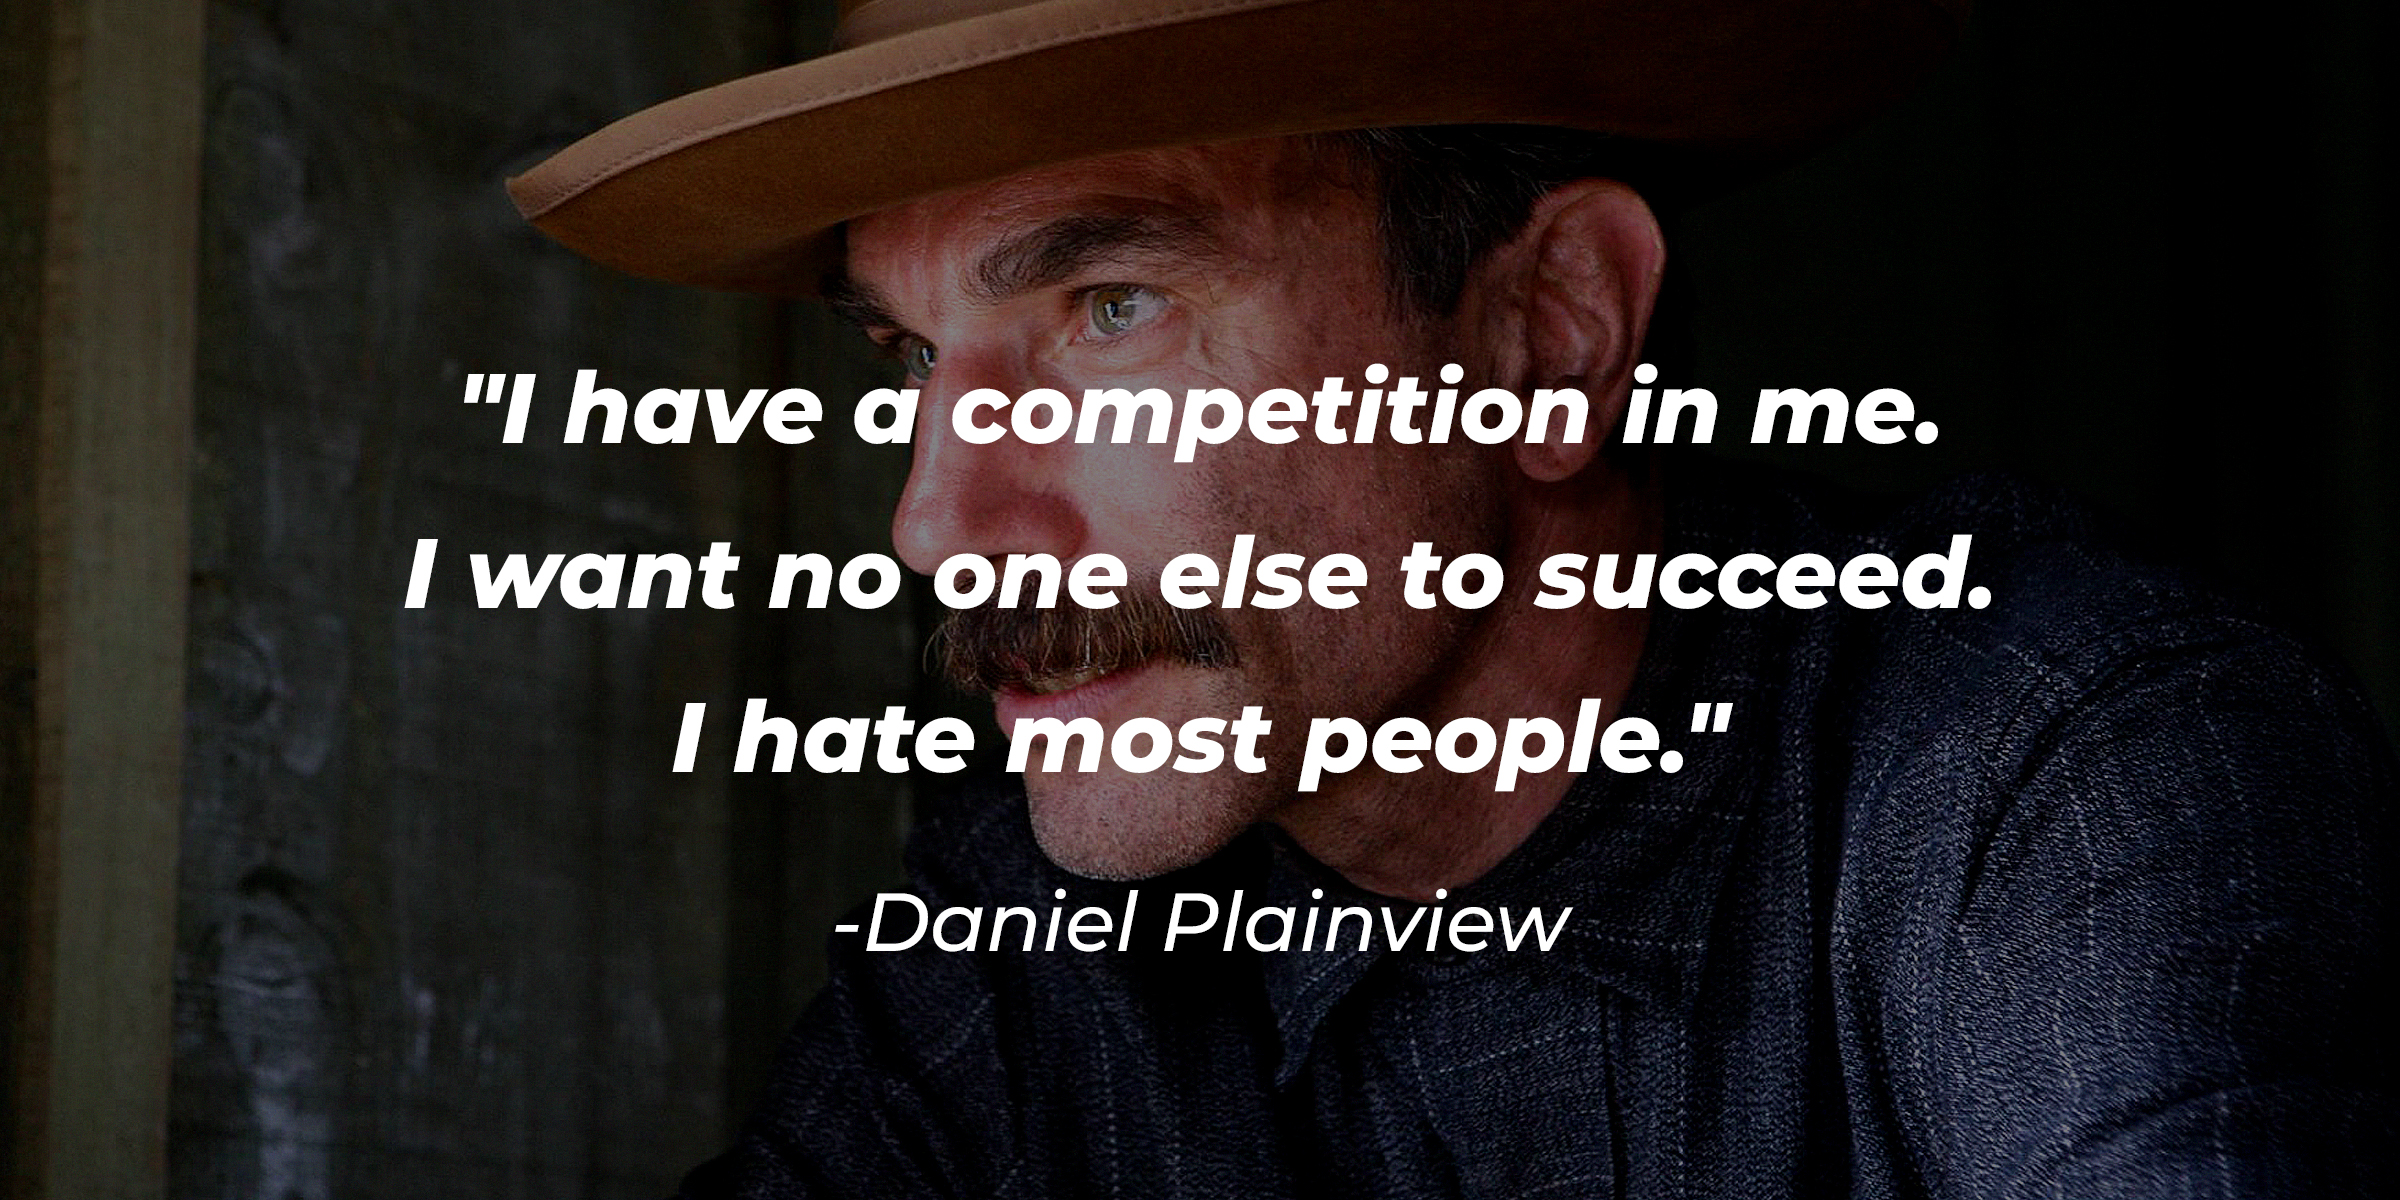 An image of Daniel Plainview, with his quote: "I have a competition in me. I want no one else to succeed. I hate most people." | Source: Facebook.com/ThereWillBeBloodMovie